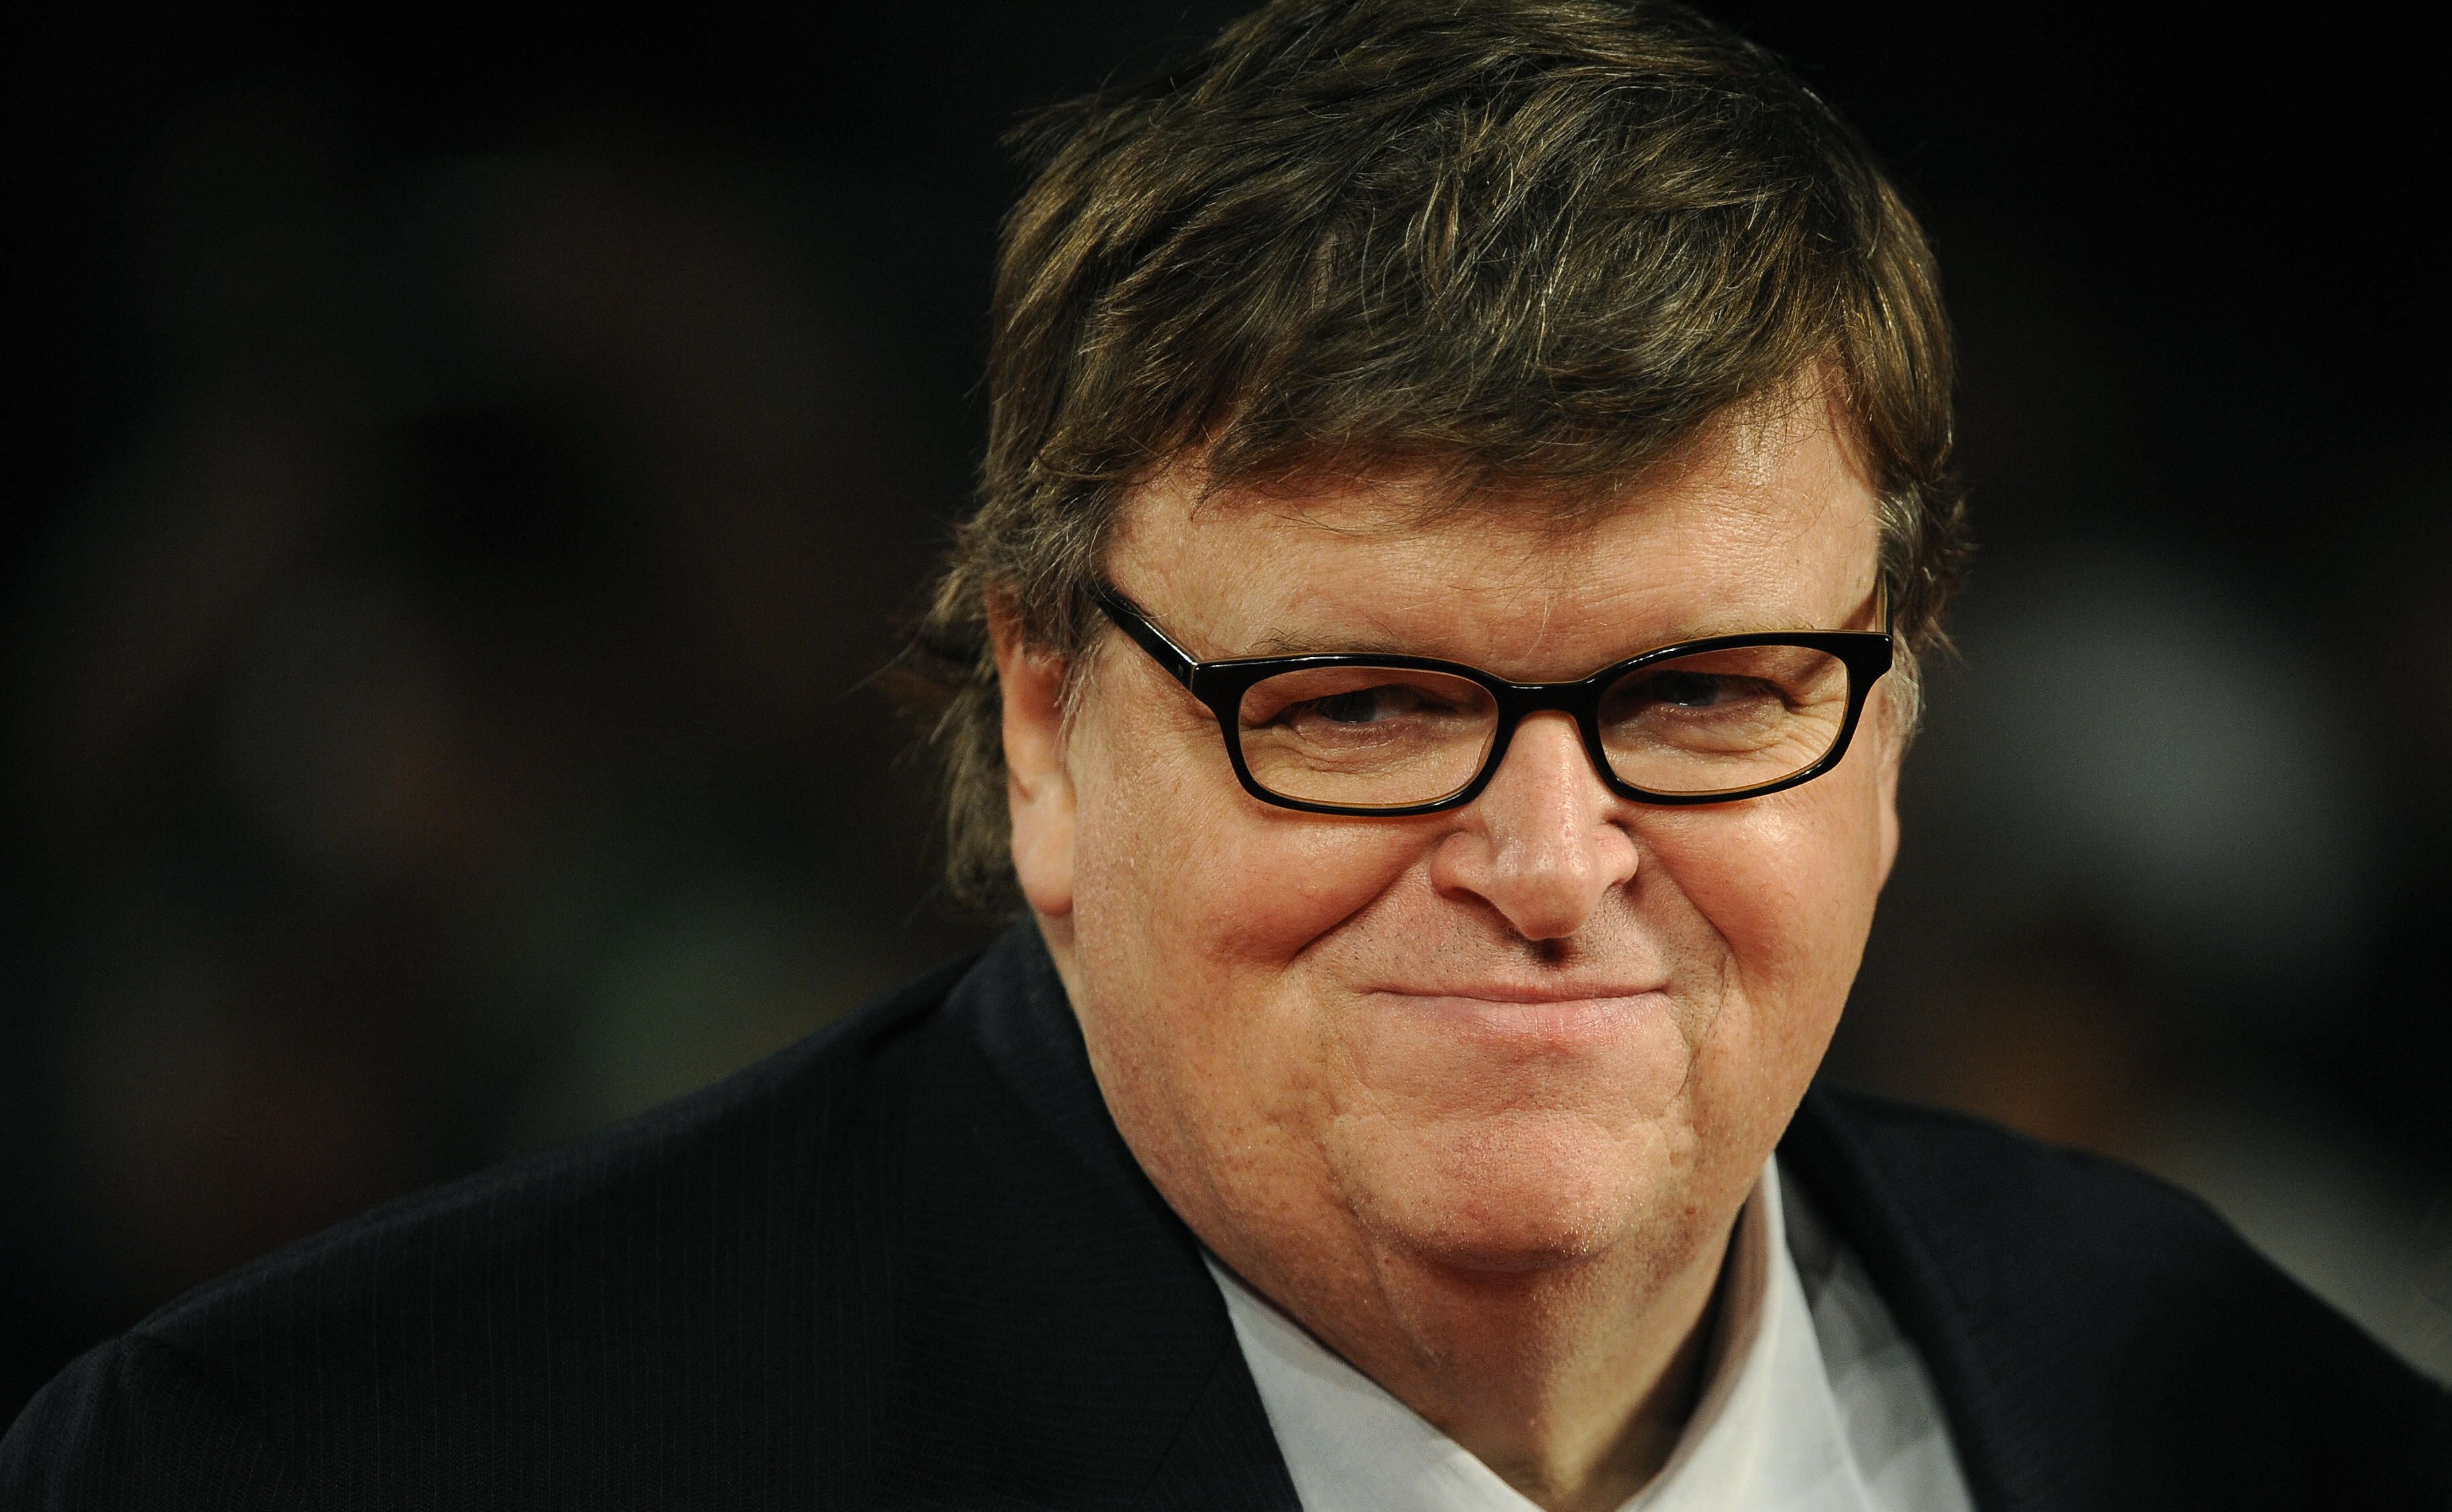 Controversial documentary filmmaker Michael Moore